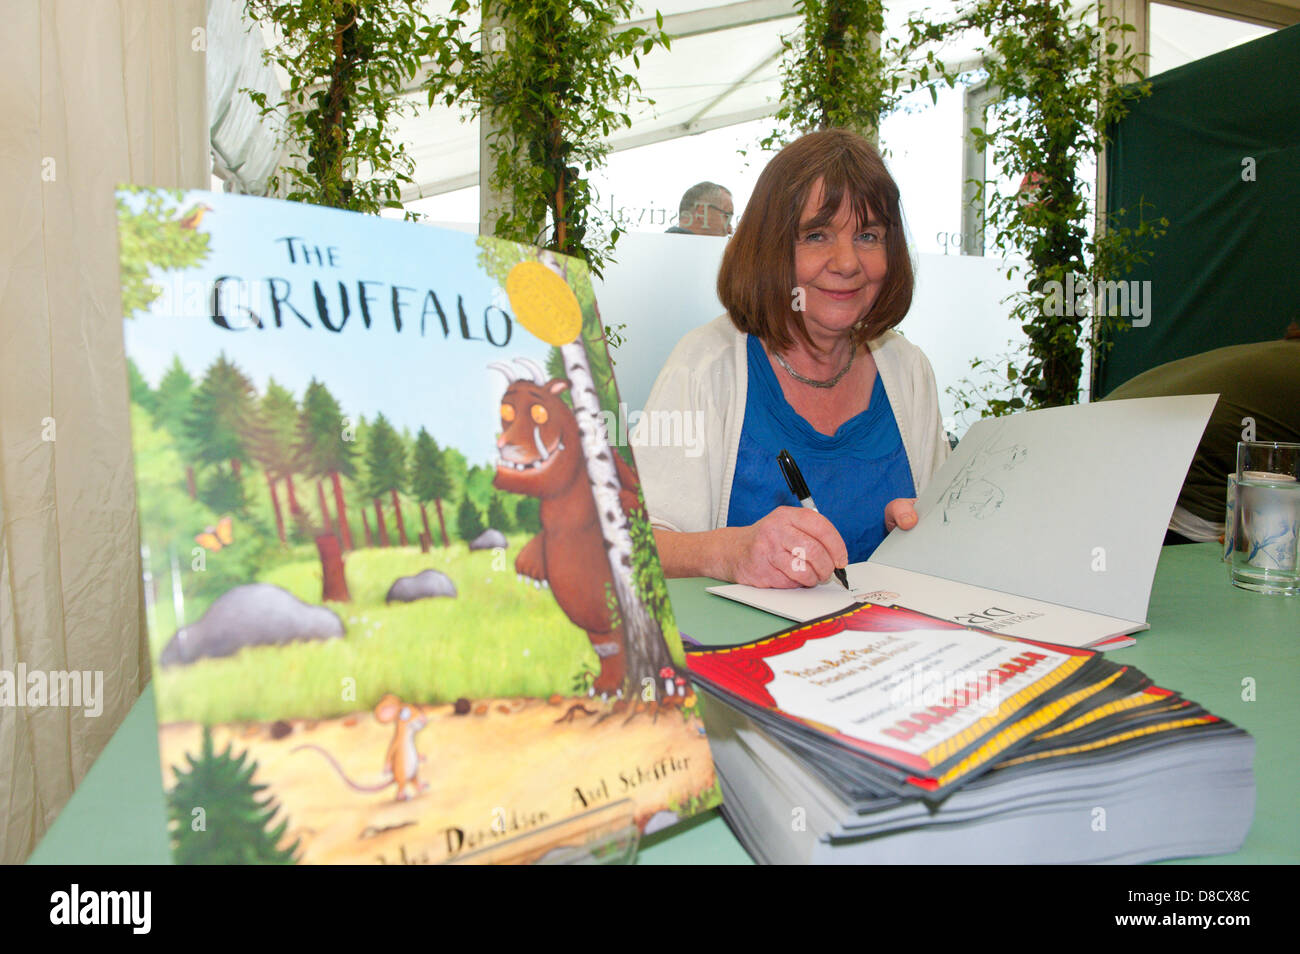 Hay-On-Wye, UK. 25th May 2013. Julia Donaldson signs books on the third day of The Telegraph Hay Festival. Photo Credit: Graham M. Lawrence/Alamy Live News. Stock Photo